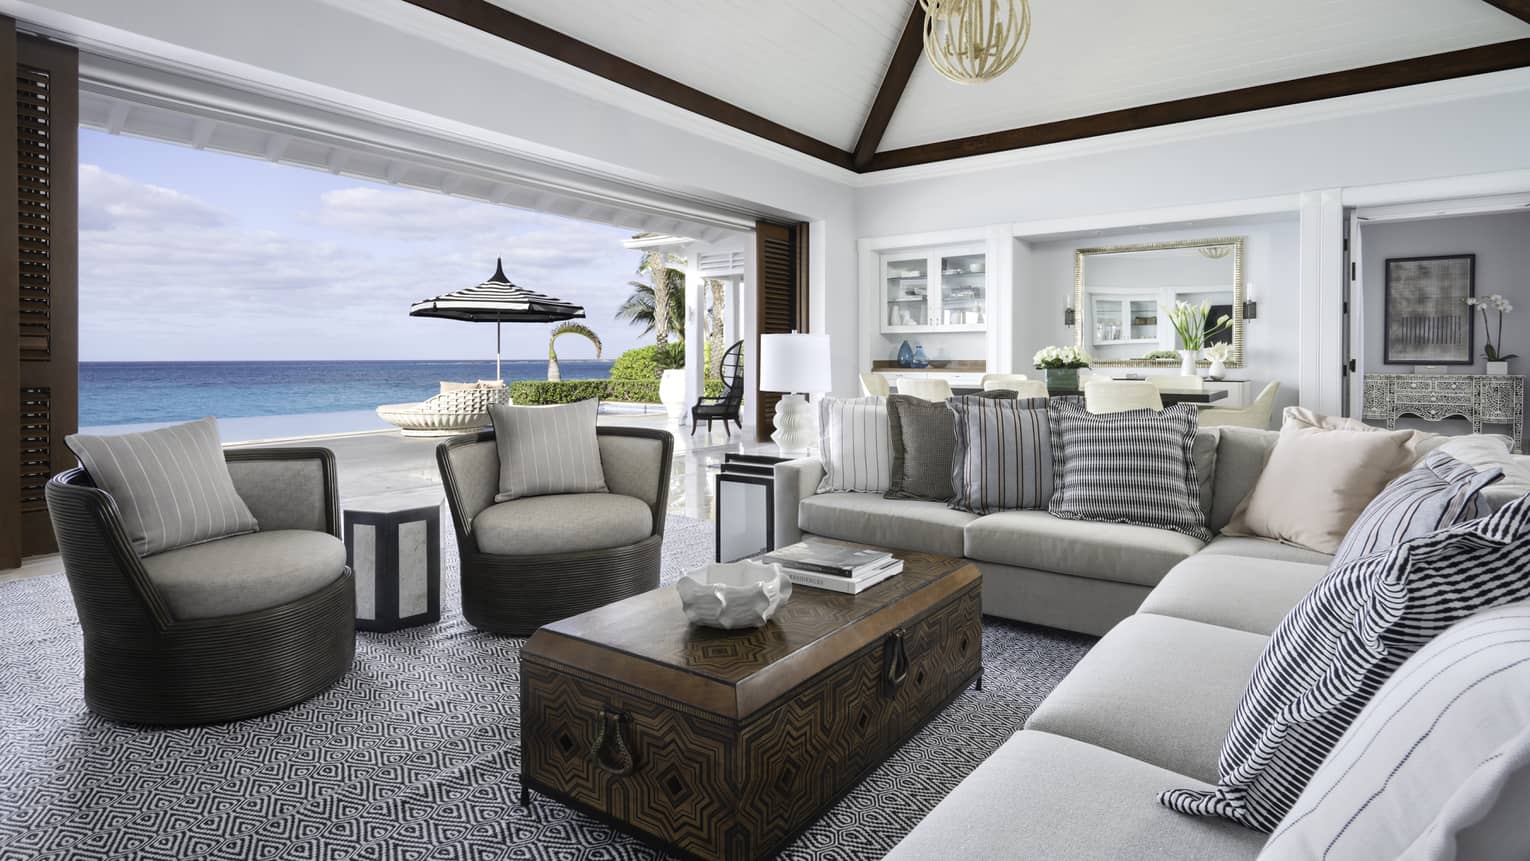 Beachfront Villa Residence large living room with modular sofa, armchairs by open wall to patio overlooking ocean  